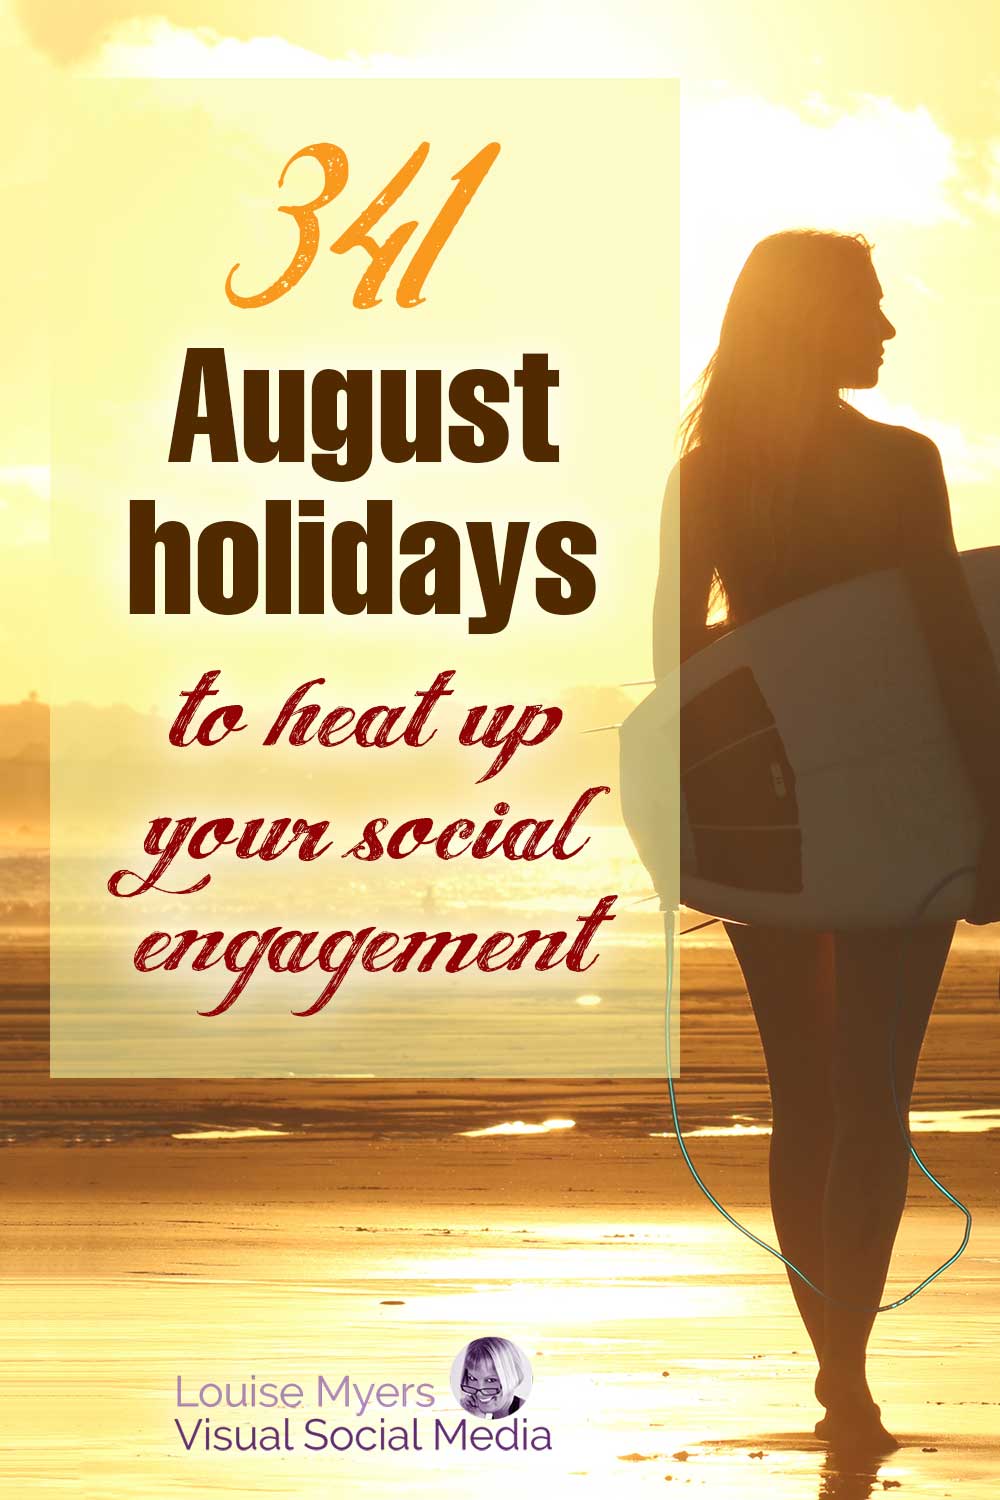 woman with surfboard walking on beach at daybreak with text 341 august holidays to heat up your social engagement.